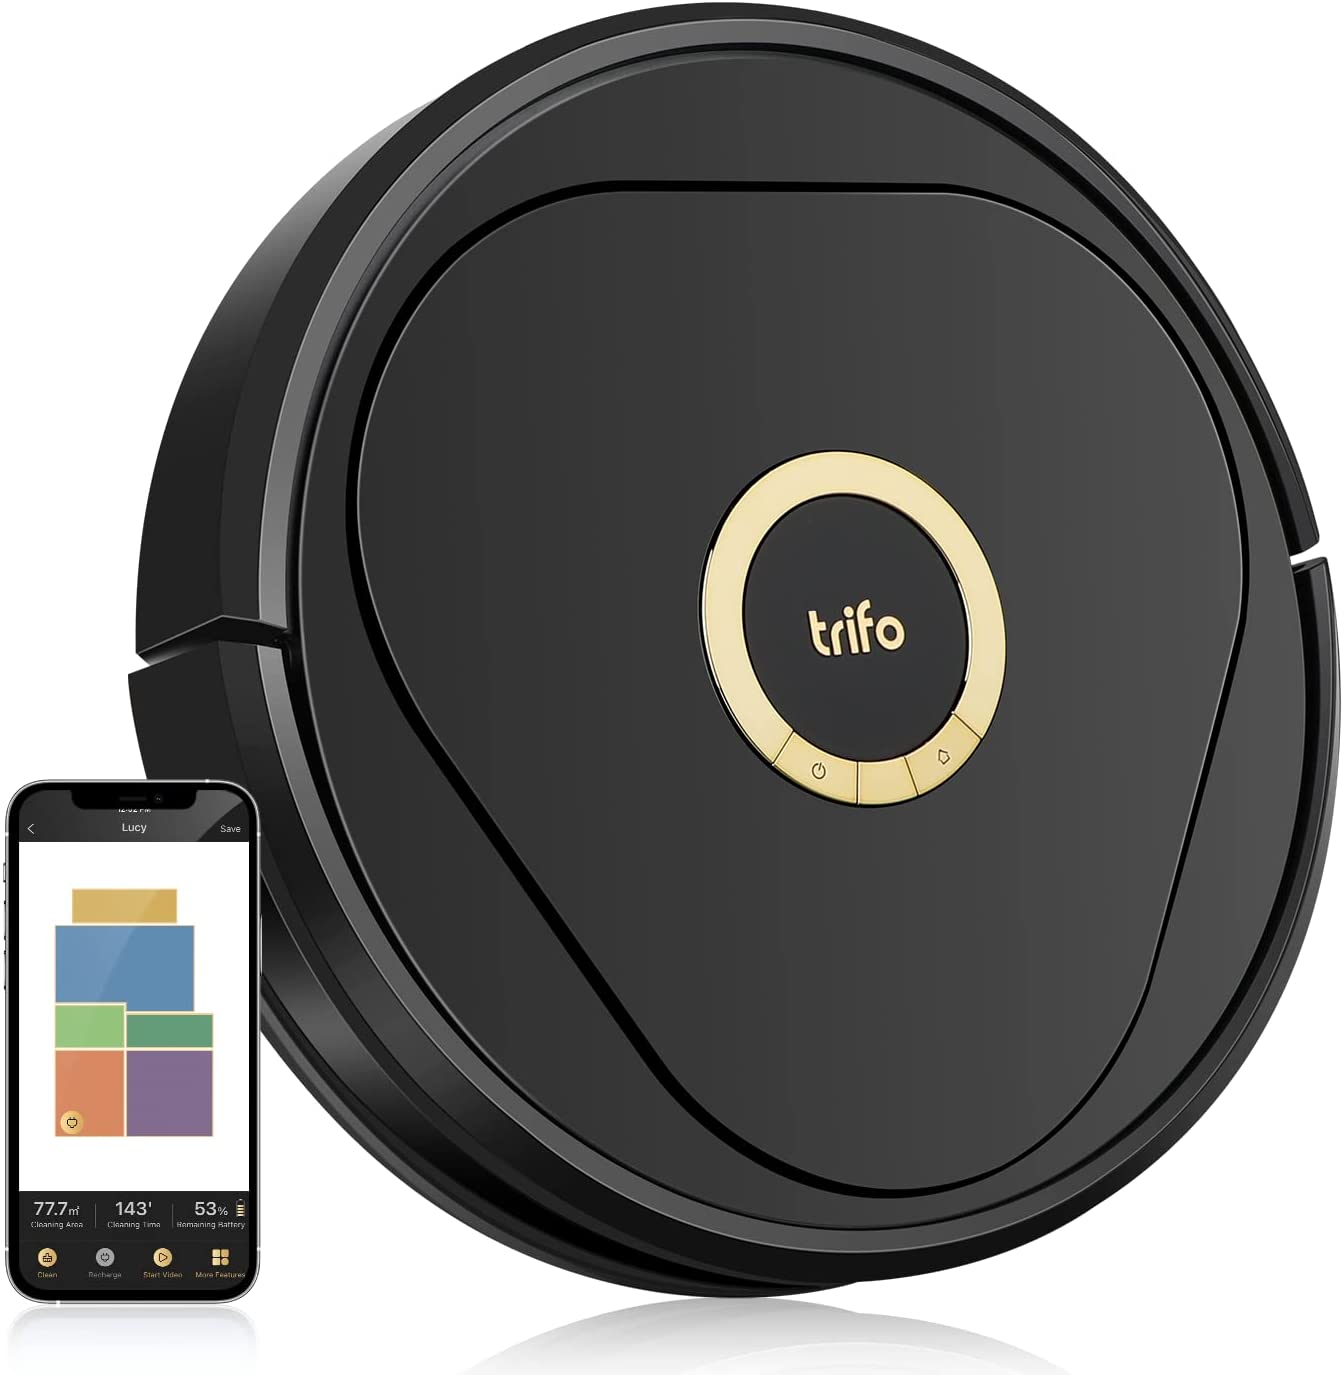 Trifo Lucy Robot Vacuum and Mop Cleaner with 1080p Cameras $427.49